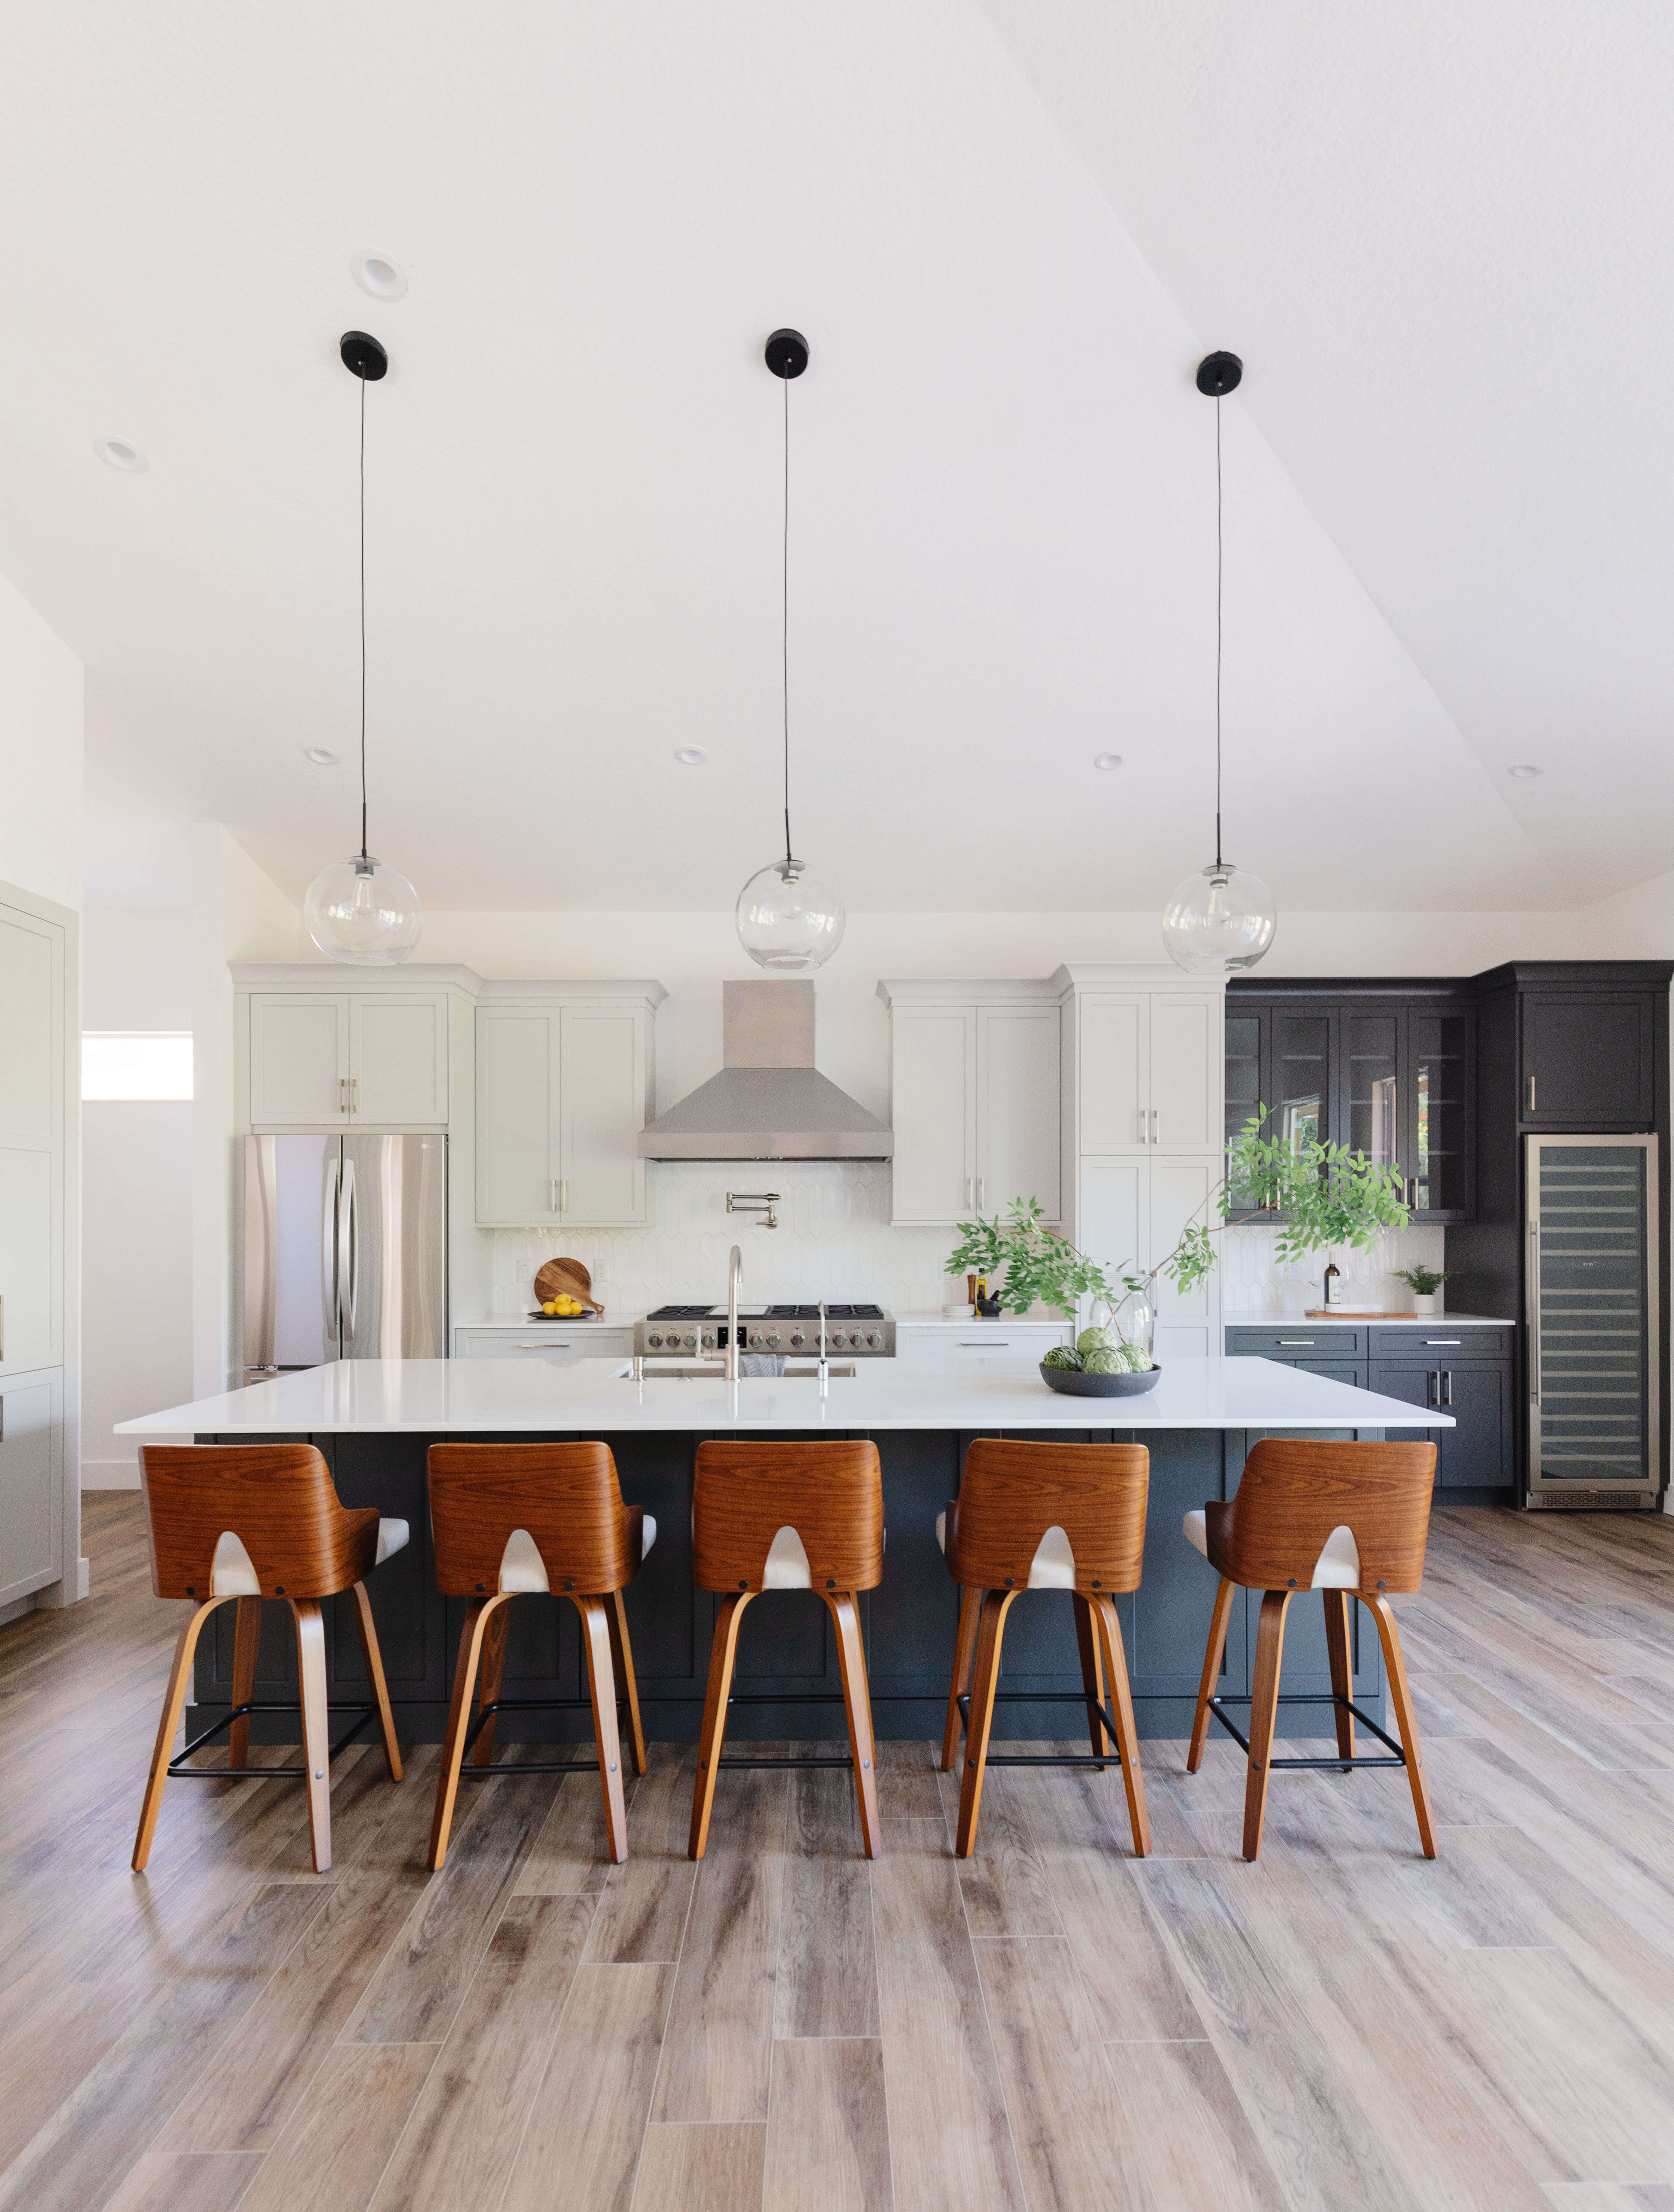 A black and white Mid-Century Modern kitchen with a large kitchen island for 5 and tall vaulted ceilings.